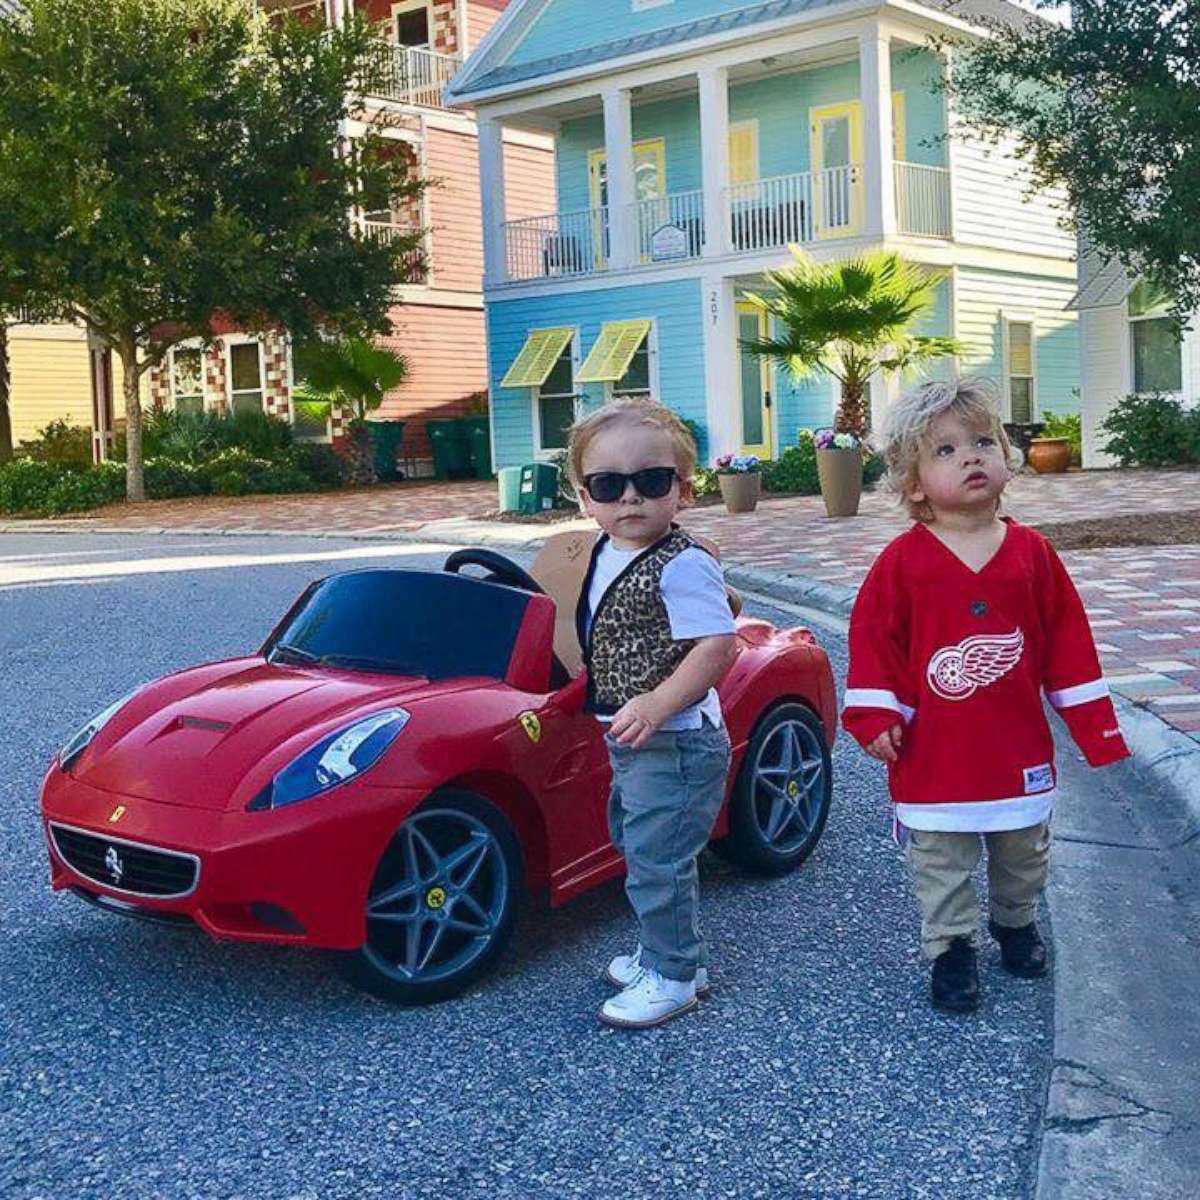 PHOTO: Lauren Willis of Destin, Florida, dressed her twin boys, Charlie and Row Willis, 1, as Ferris Bueller and his best friend Cameron Frye from the movie, "Ferris Bueller's Day Off."